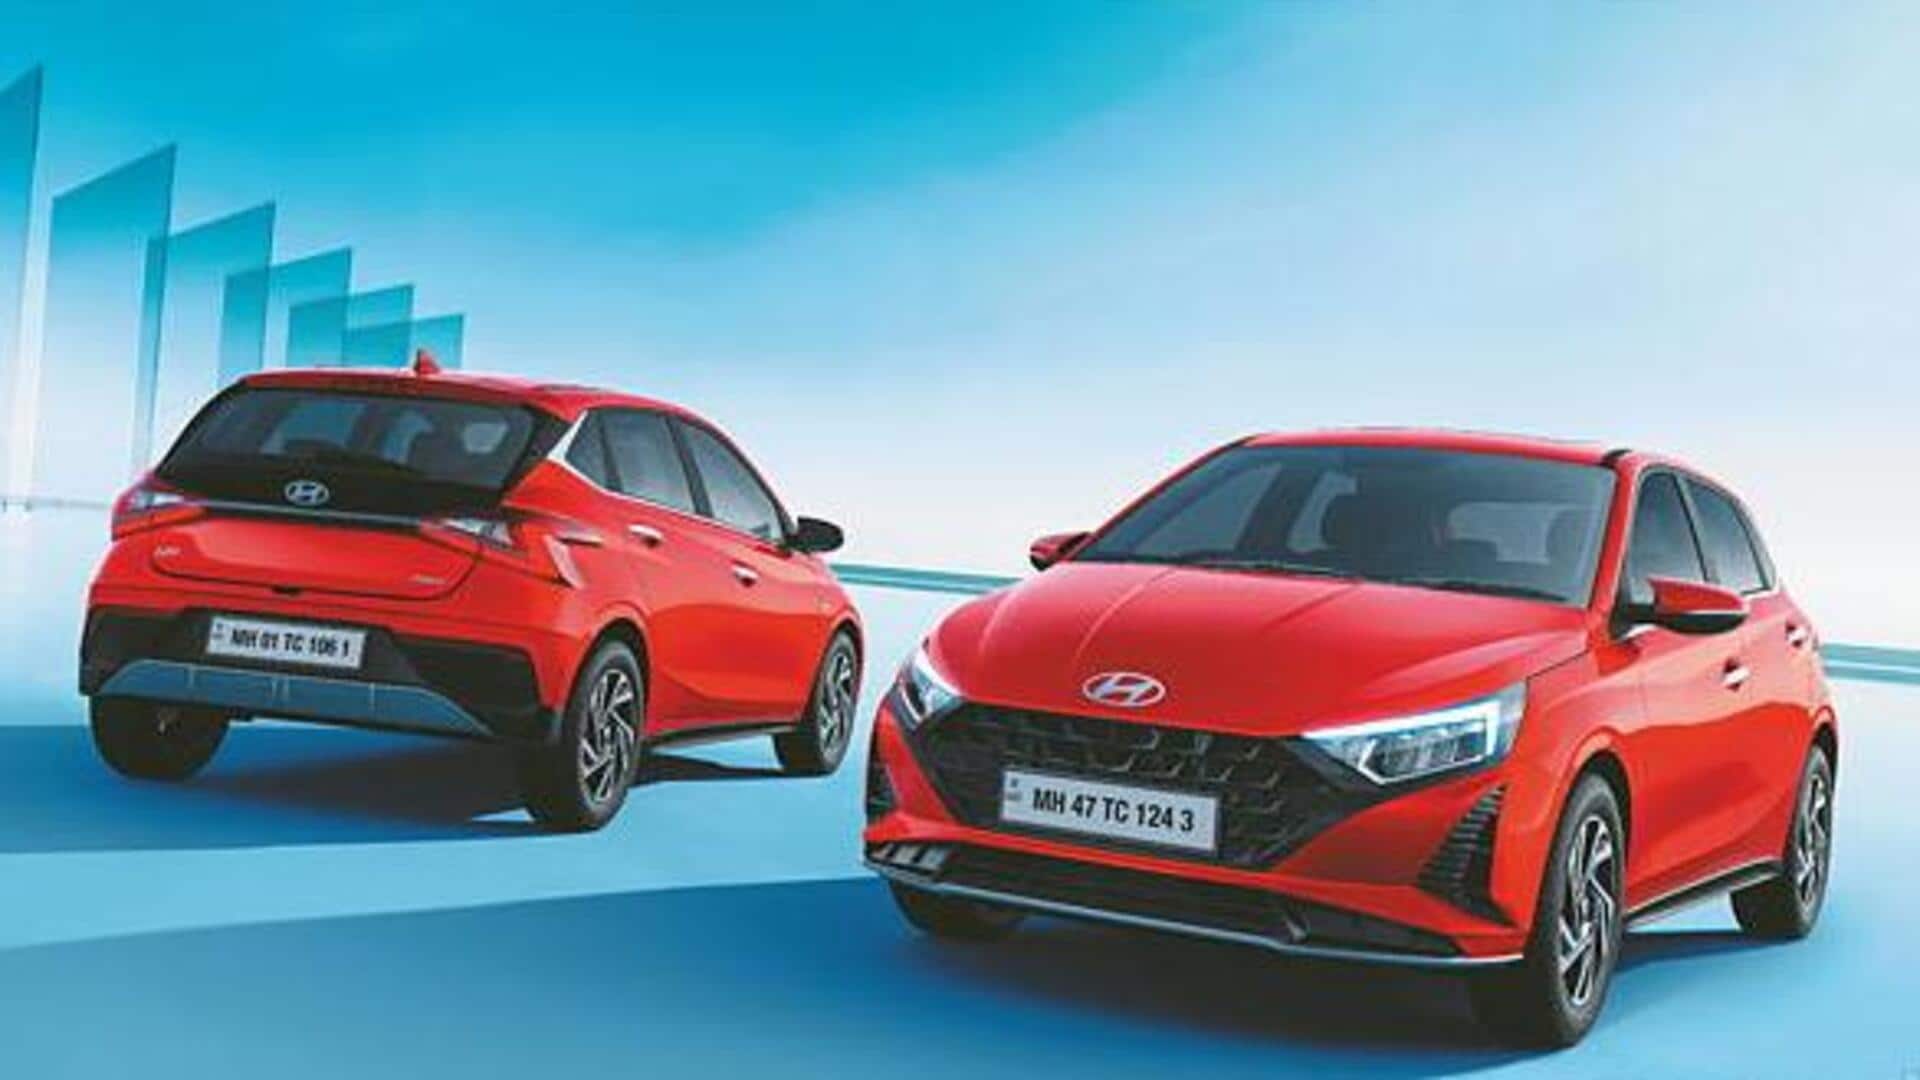 2023 Hyundai i20 launched in India at Rs. 7 lakh